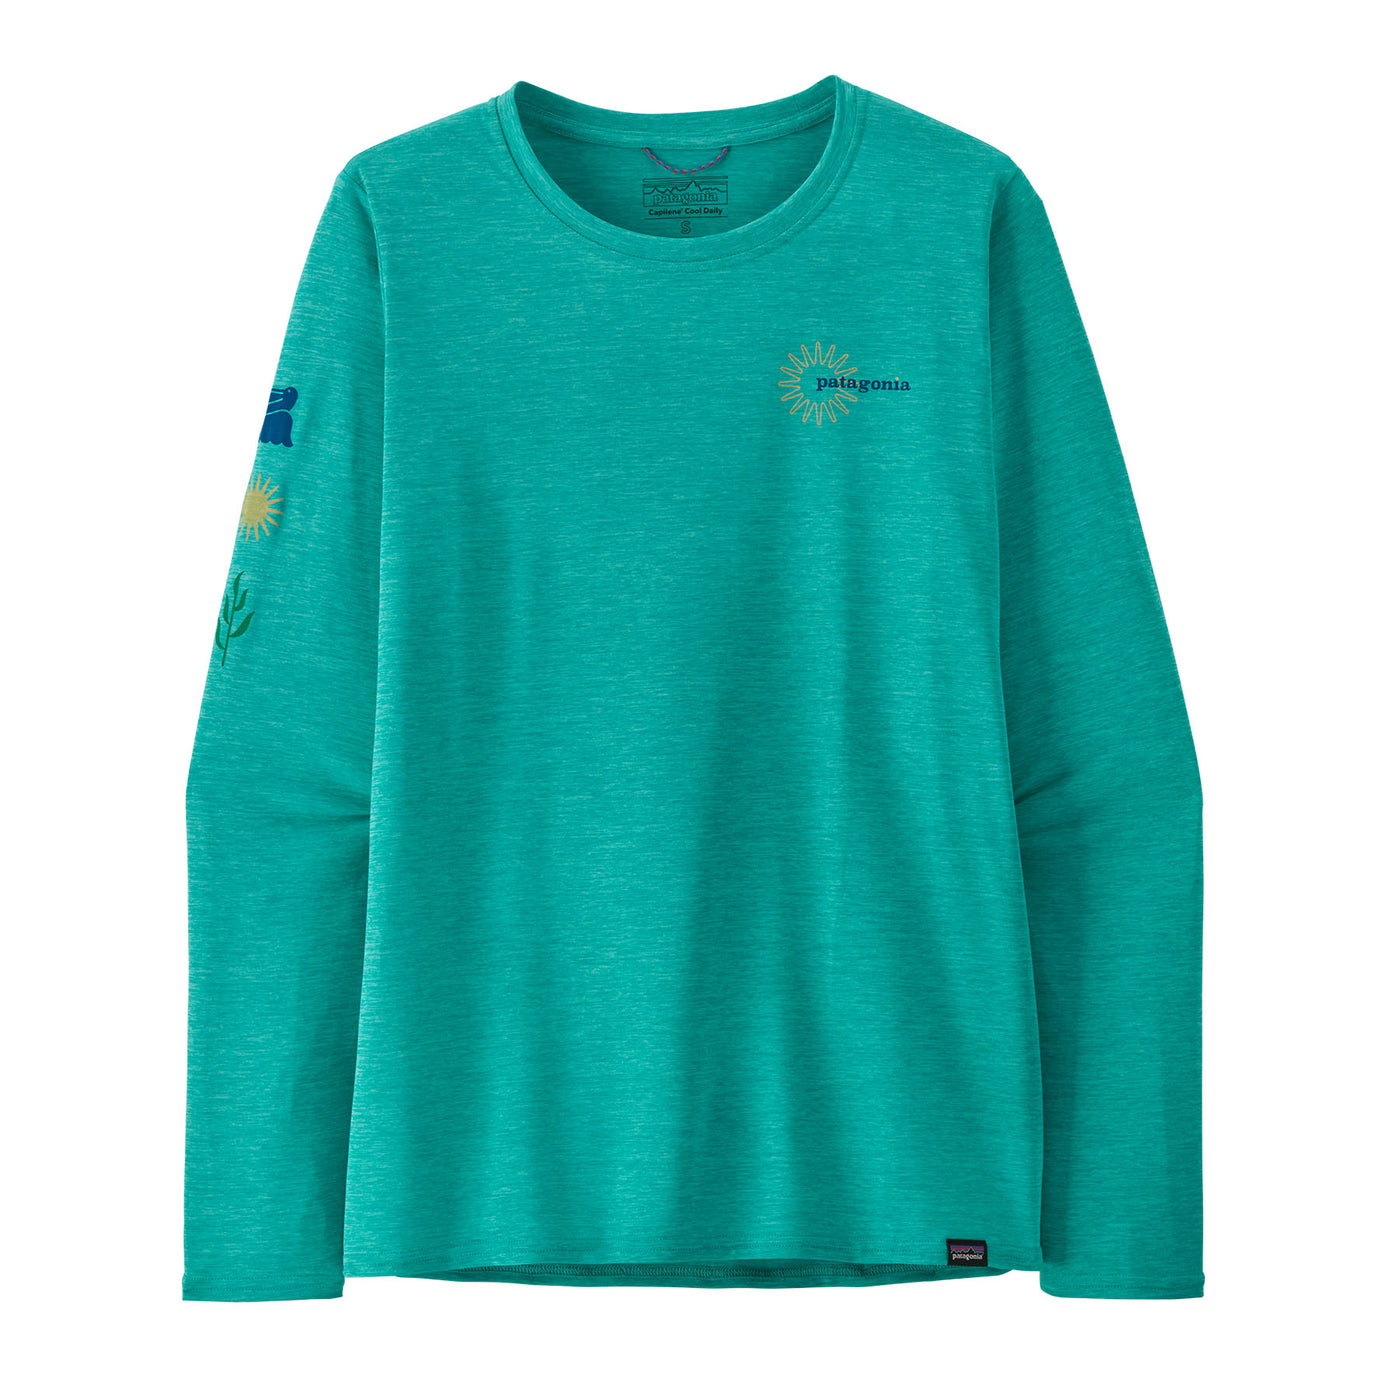 PATAGONIA Women's Long-Sleeved Capilene Cool Daily Graphic Shirt - Waters Channel Islands ubtidal Blue X-Dye CSLX / S